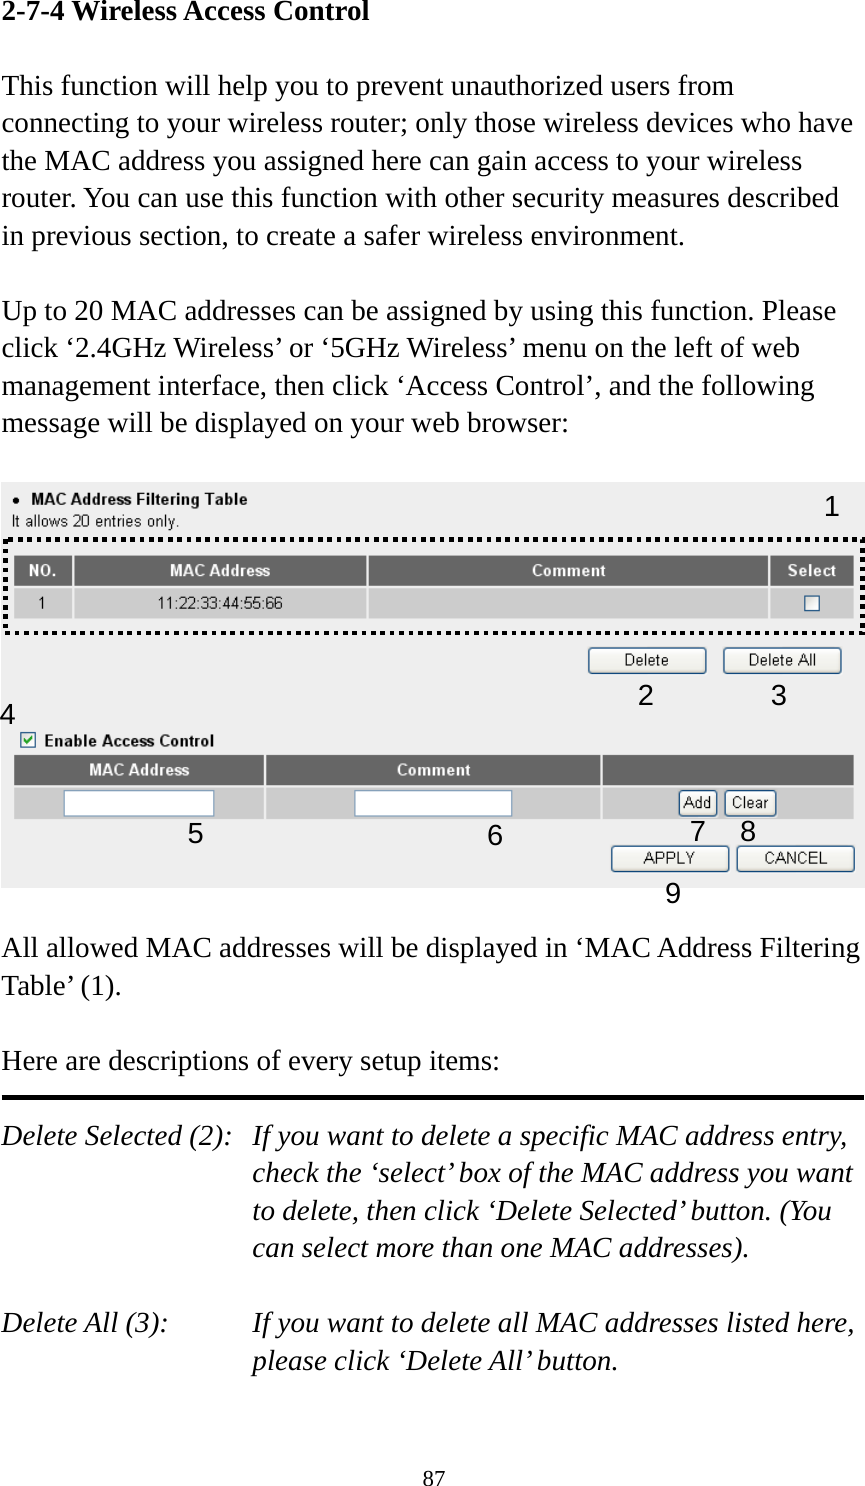 87 2-7-4 Wireless Access Control  This function will help you to prevent unauthorized users from connecting to your wireless router; only those wireless devices who have the MAC address you assigned here can gain access to your wireless router. You can use this function with other security measures described in previous section, to create a safer wireless environment.  Up to 20 MAC addresses can be assigned by using this function. Please click ‘2.4GHz Wireless’ or ‘5GHz Wireless’ menu on the left of web management interface, then click ‘Access Control’, and the following message will be displayed on your web browser:    All allowed MAC addresses will be displayed in ‘MAC Address Filtering Table’ (1).    Here are descriptions of every setup items:  Delete Selected (2):   If you want to delete a specific MAC address entry, check the ‘select’ box of the MAC address you want to delete, then click ‘Delete Selected’ button. (You can select more than one MAC addresses).  Delete All (3):    If you want to delete all MAC addresses listed here, please click ‘Delete All’ button.  123 4 67 8 95 